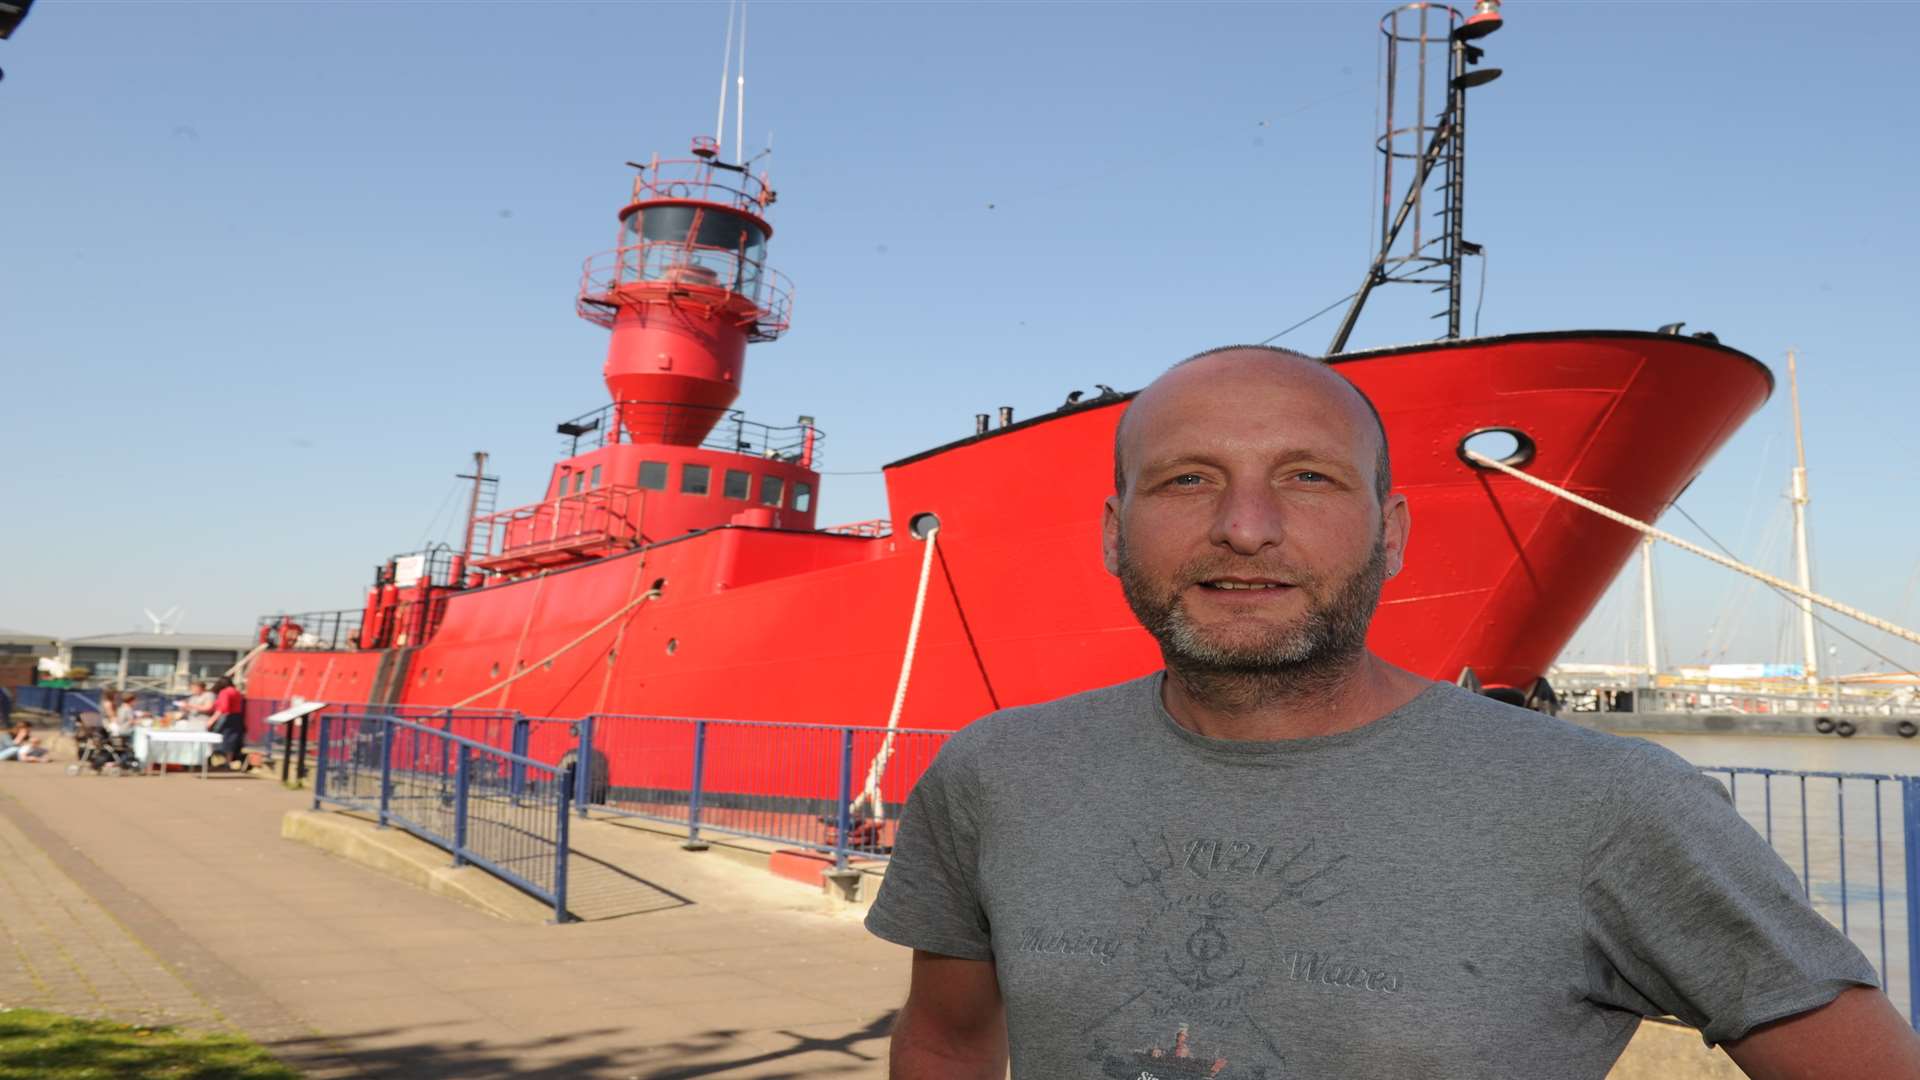 Gary Weston with the LV21 Lightship